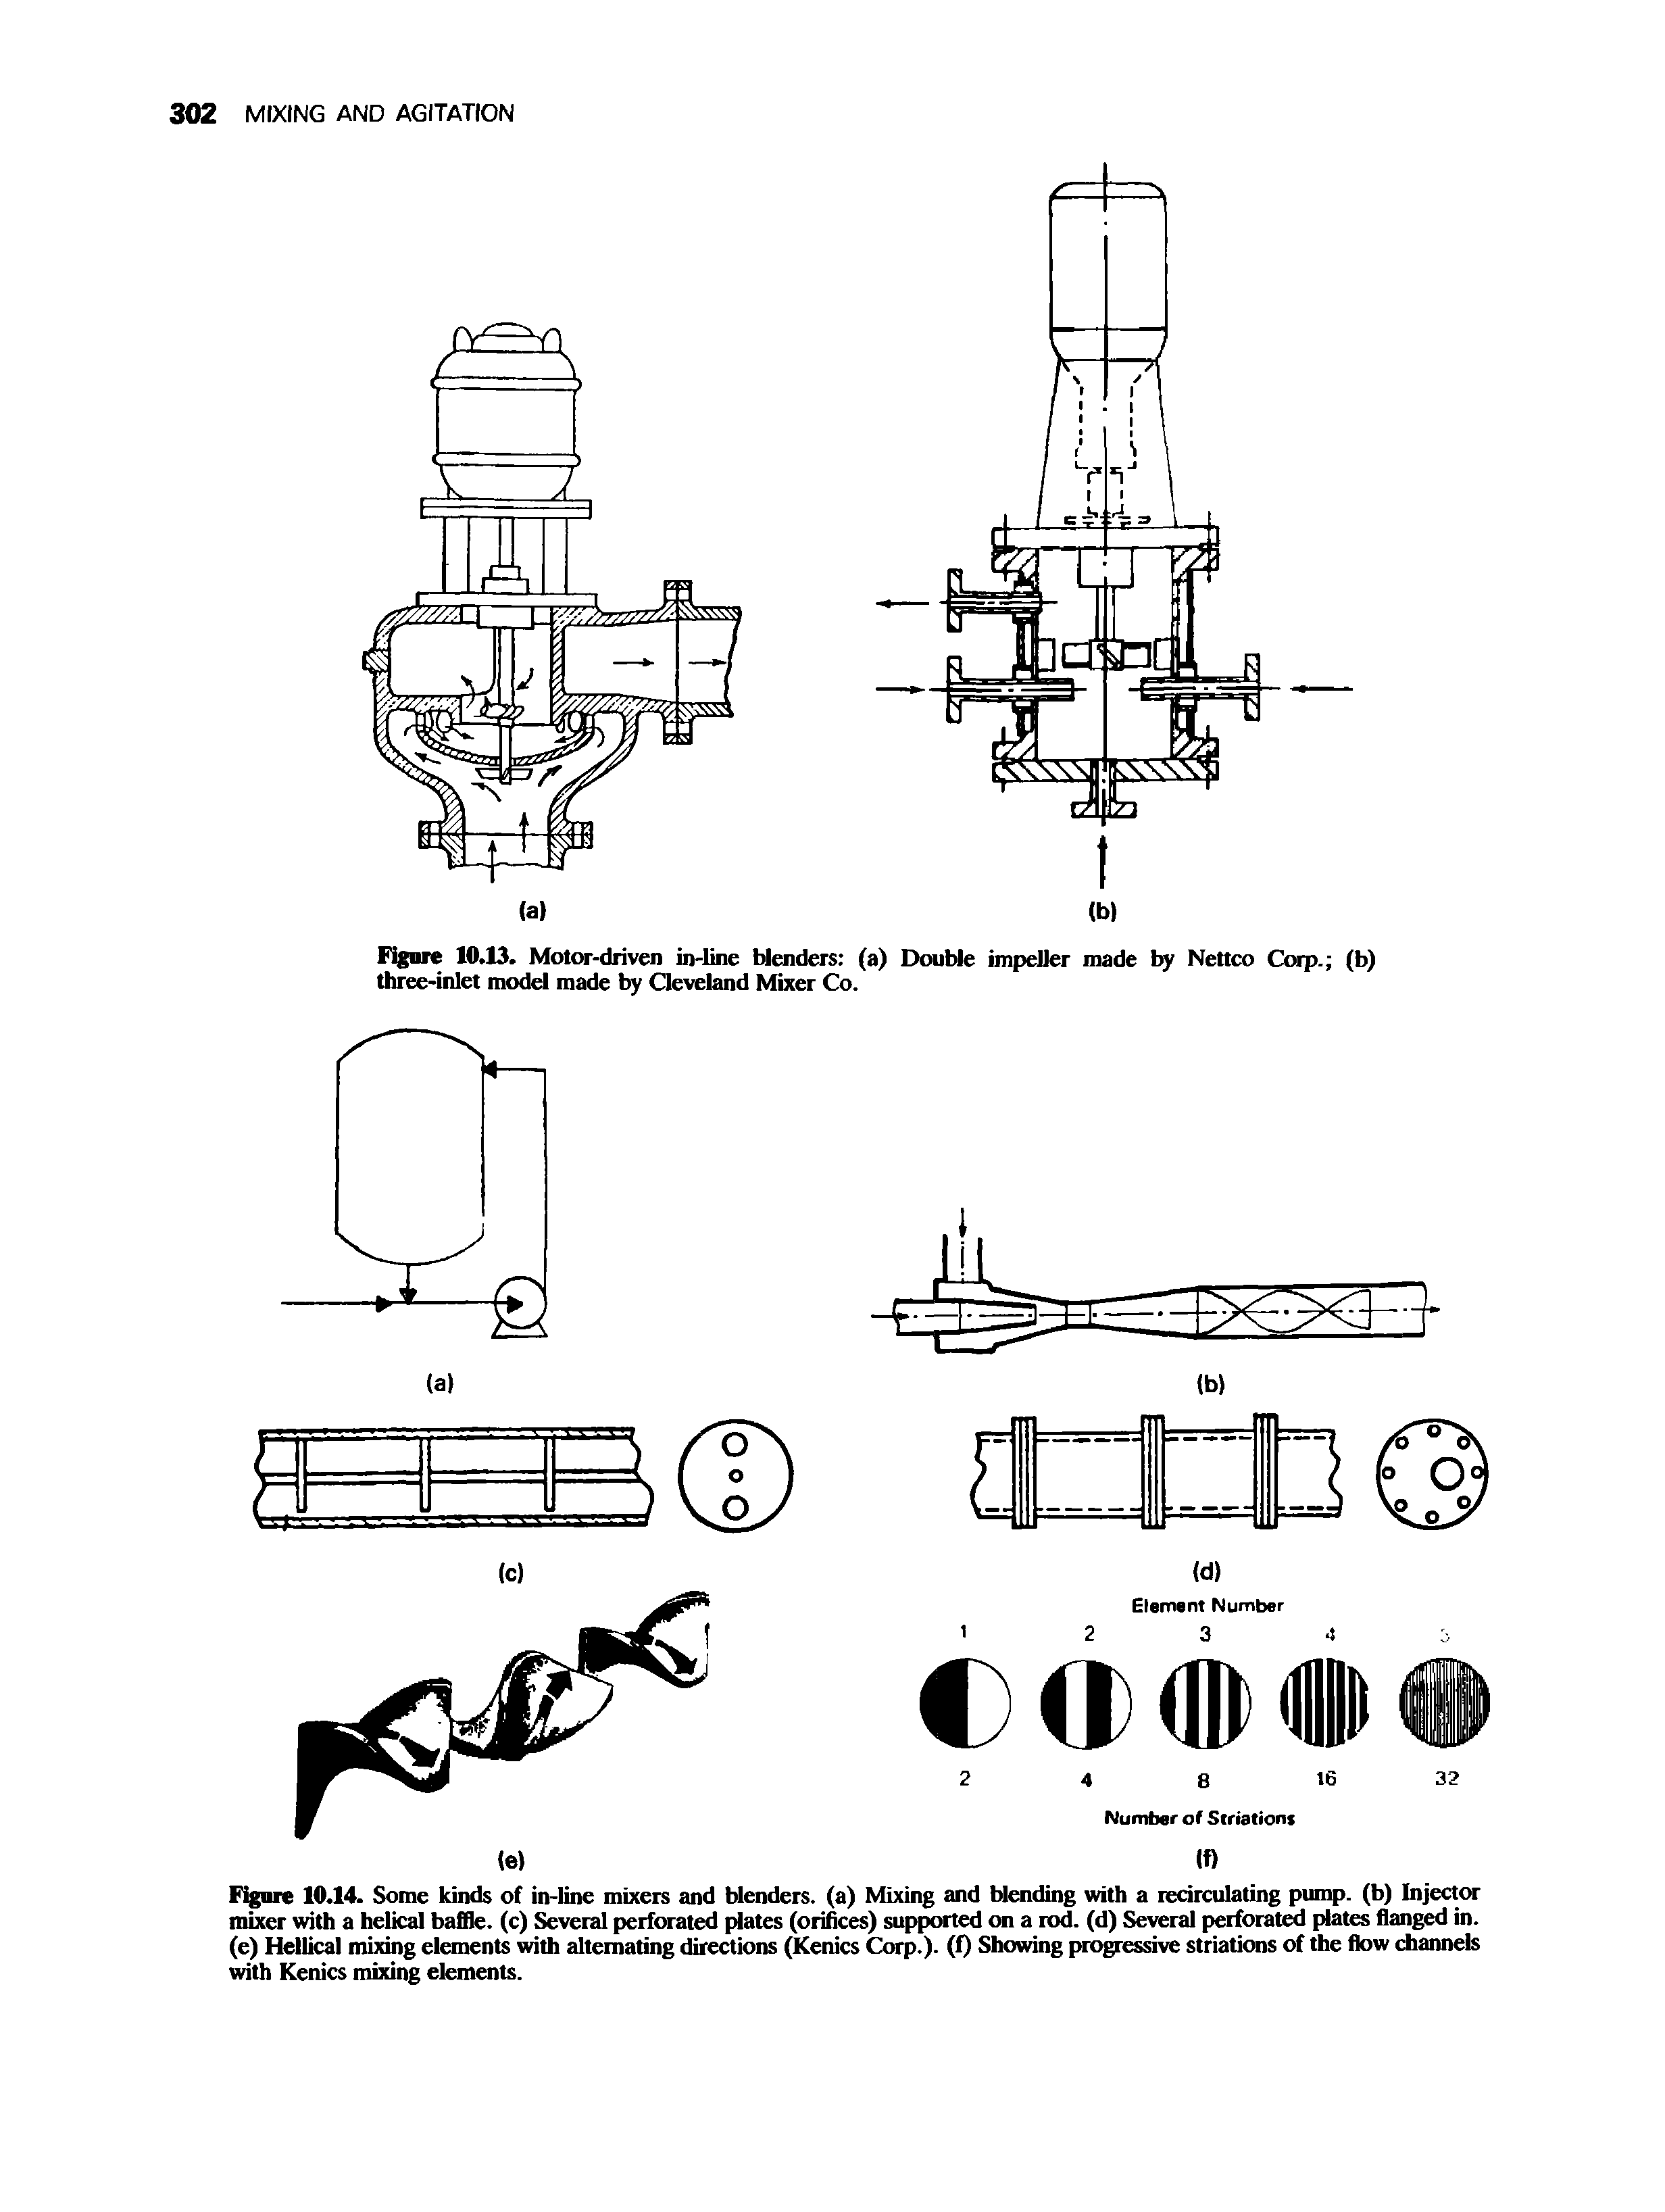 Figure 10.14. Some kinds of in-line mixers and blenders, (a) Mixing and blending with a recirculating pump, (b) Injector mixer with a helical baffle, (c) Several perforated plates (orifices) supported on a rod. (d) Several perforated plates flanged in. (e) Hellical mixing elements with alternating directions (Kenics Corp.). (f) Showing progressive striations of the flow channels with Kenics mixing elements.